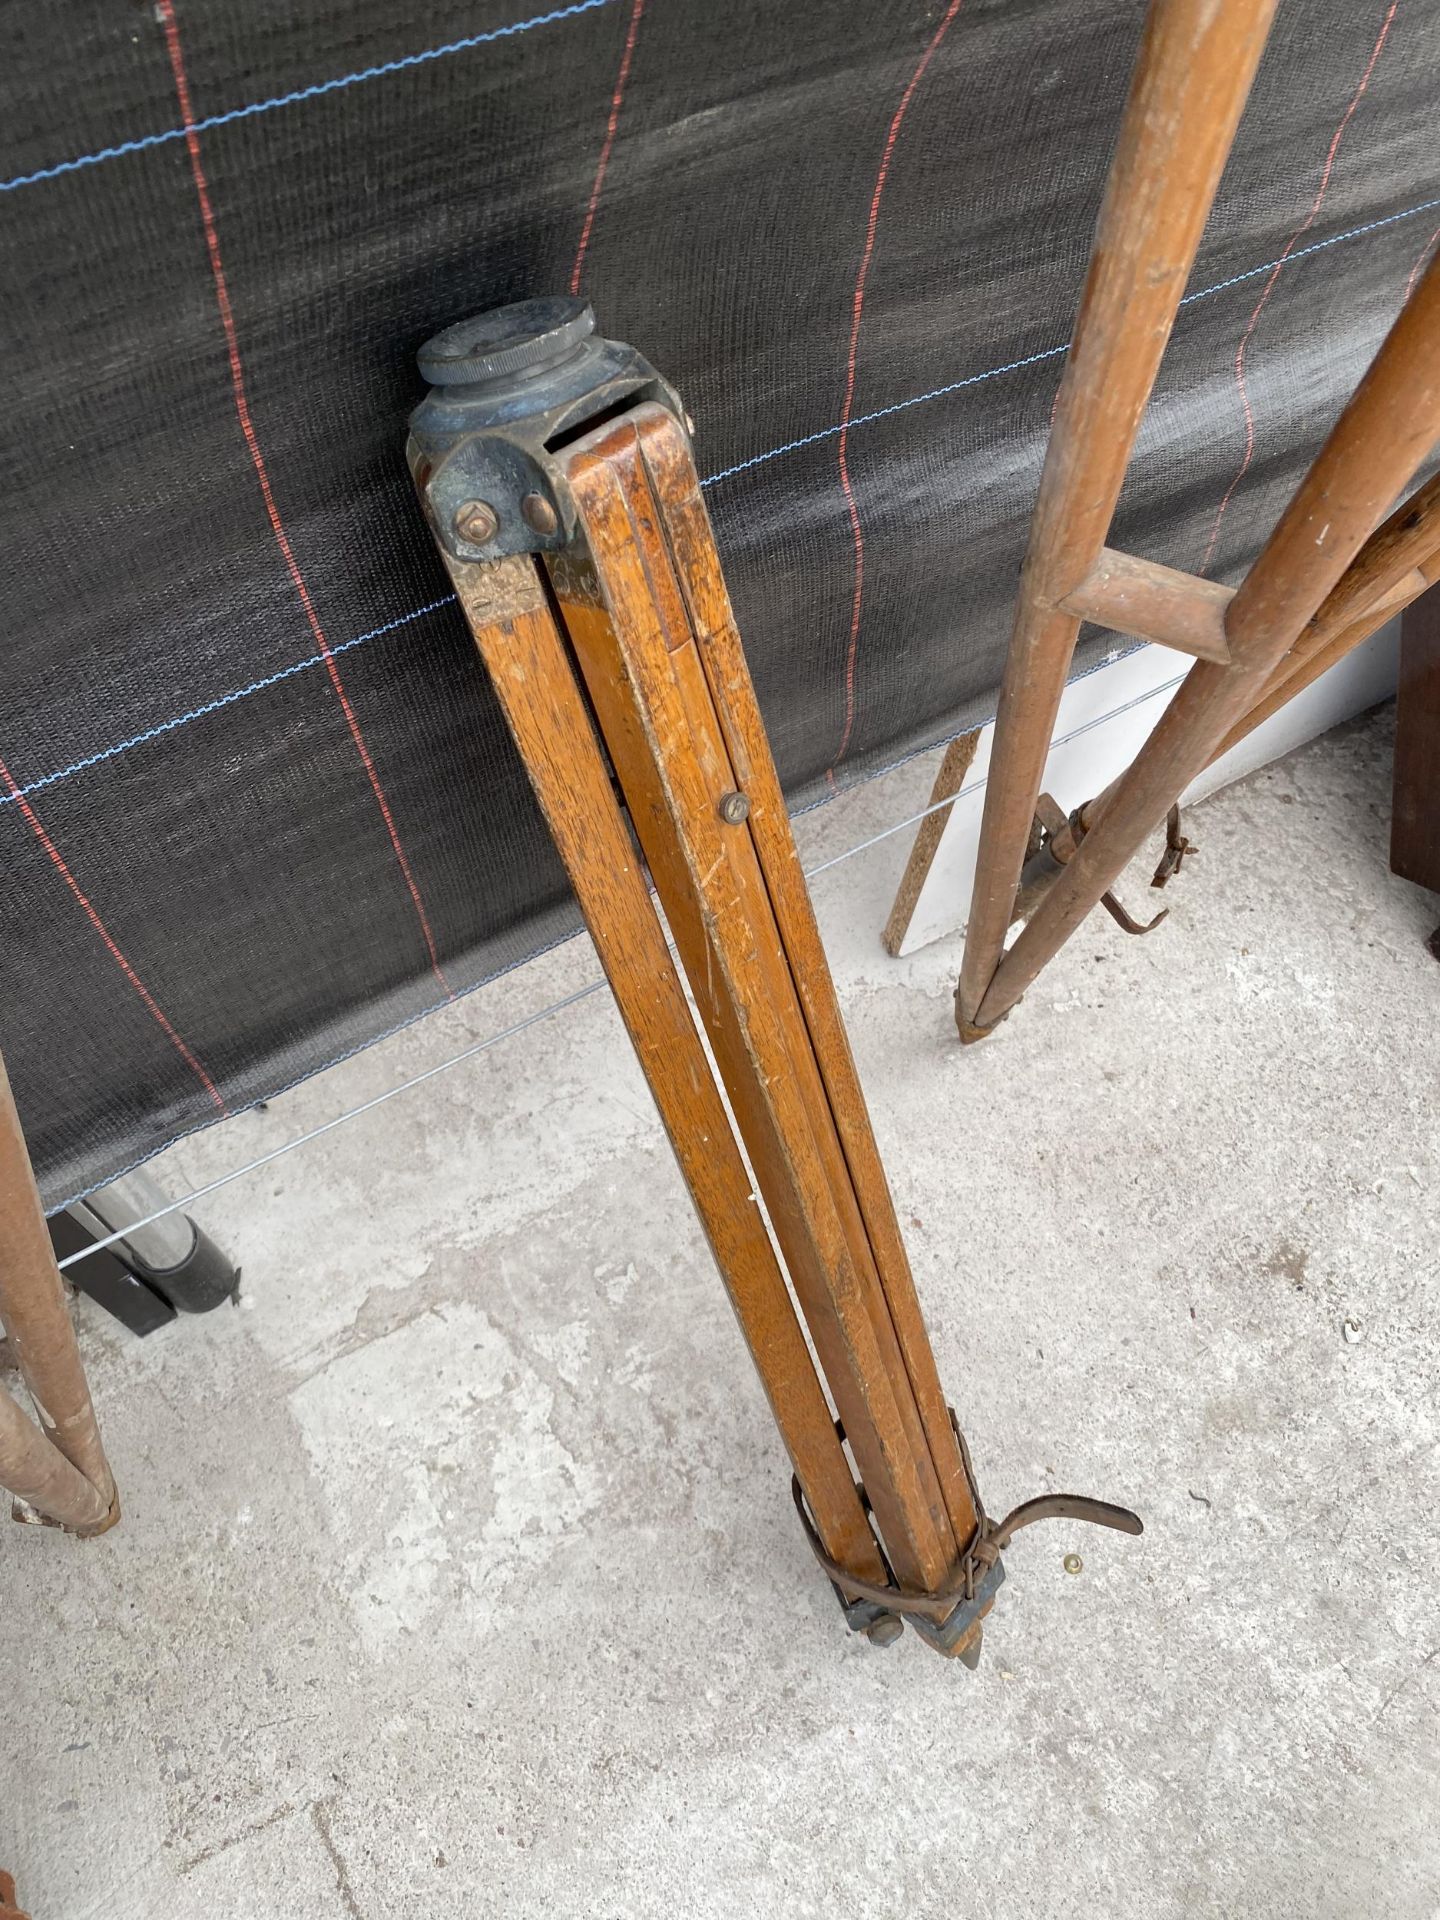 THREE LARGE VINTAGE WOODEN TRIPOD STANDS - Image 2 of 3